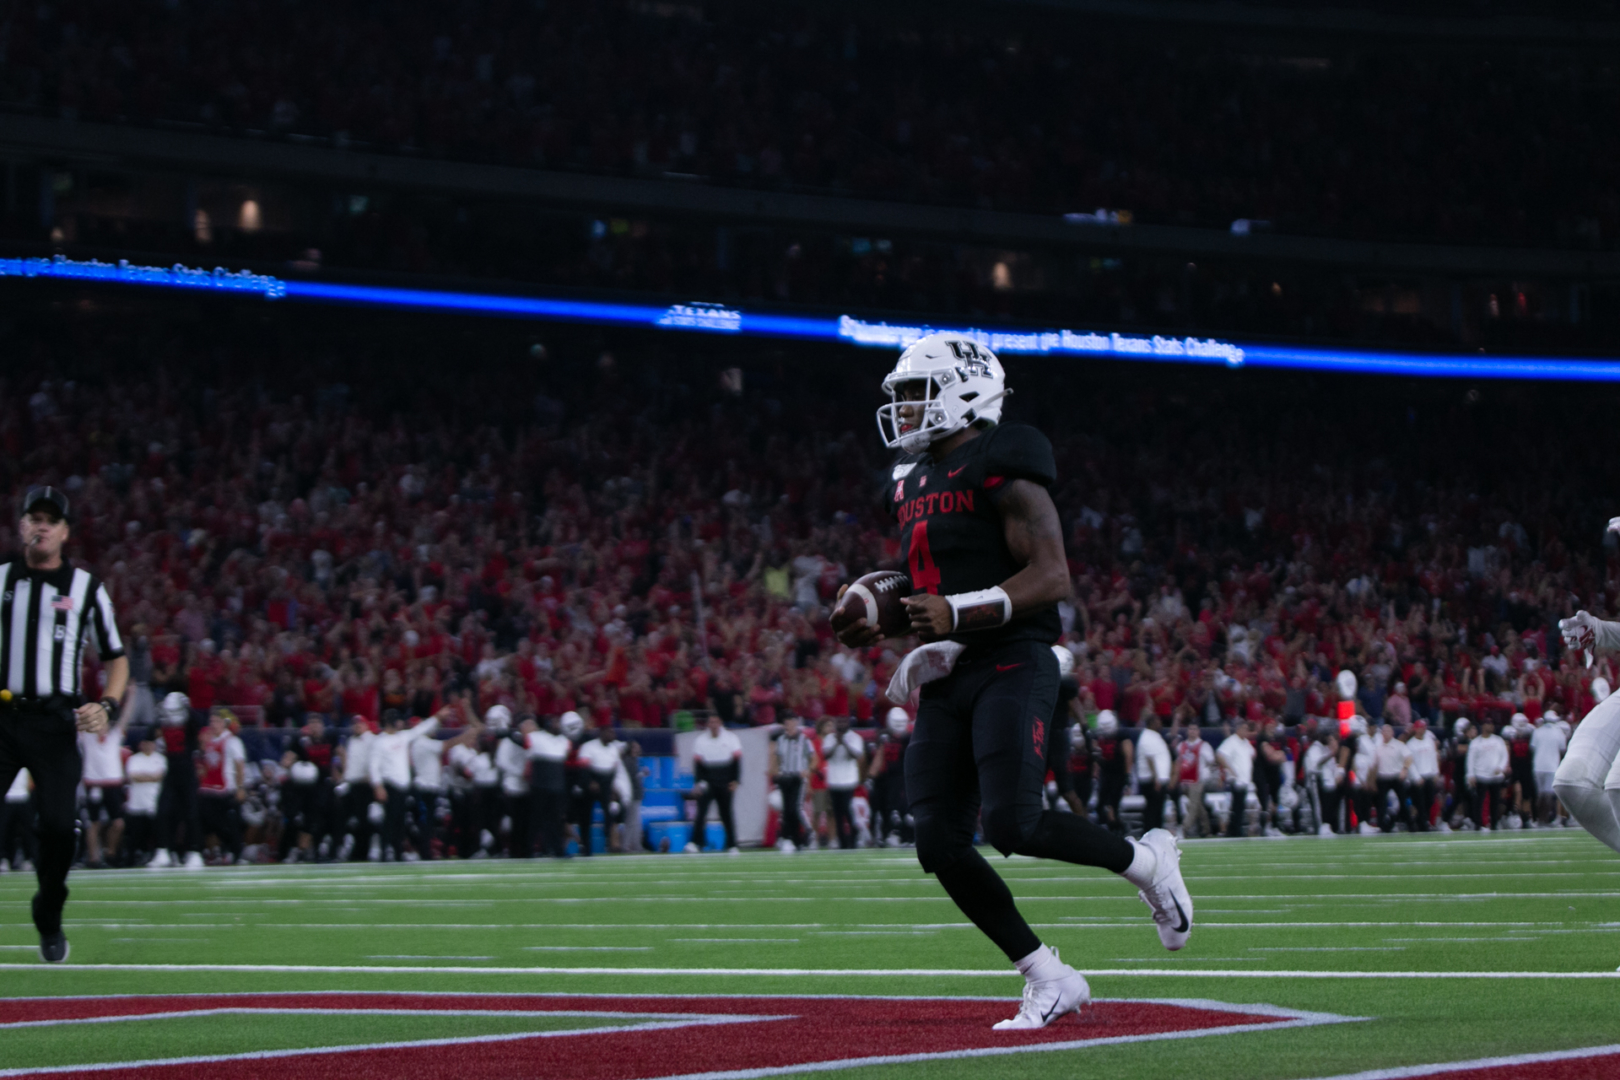 Houston senior quarterback D'Eriq King broke the FBS record most consecutive games with a passing and rushing touchdown after doing it for the 15th game in a row. | Kathryn Lenihan/The Cougar